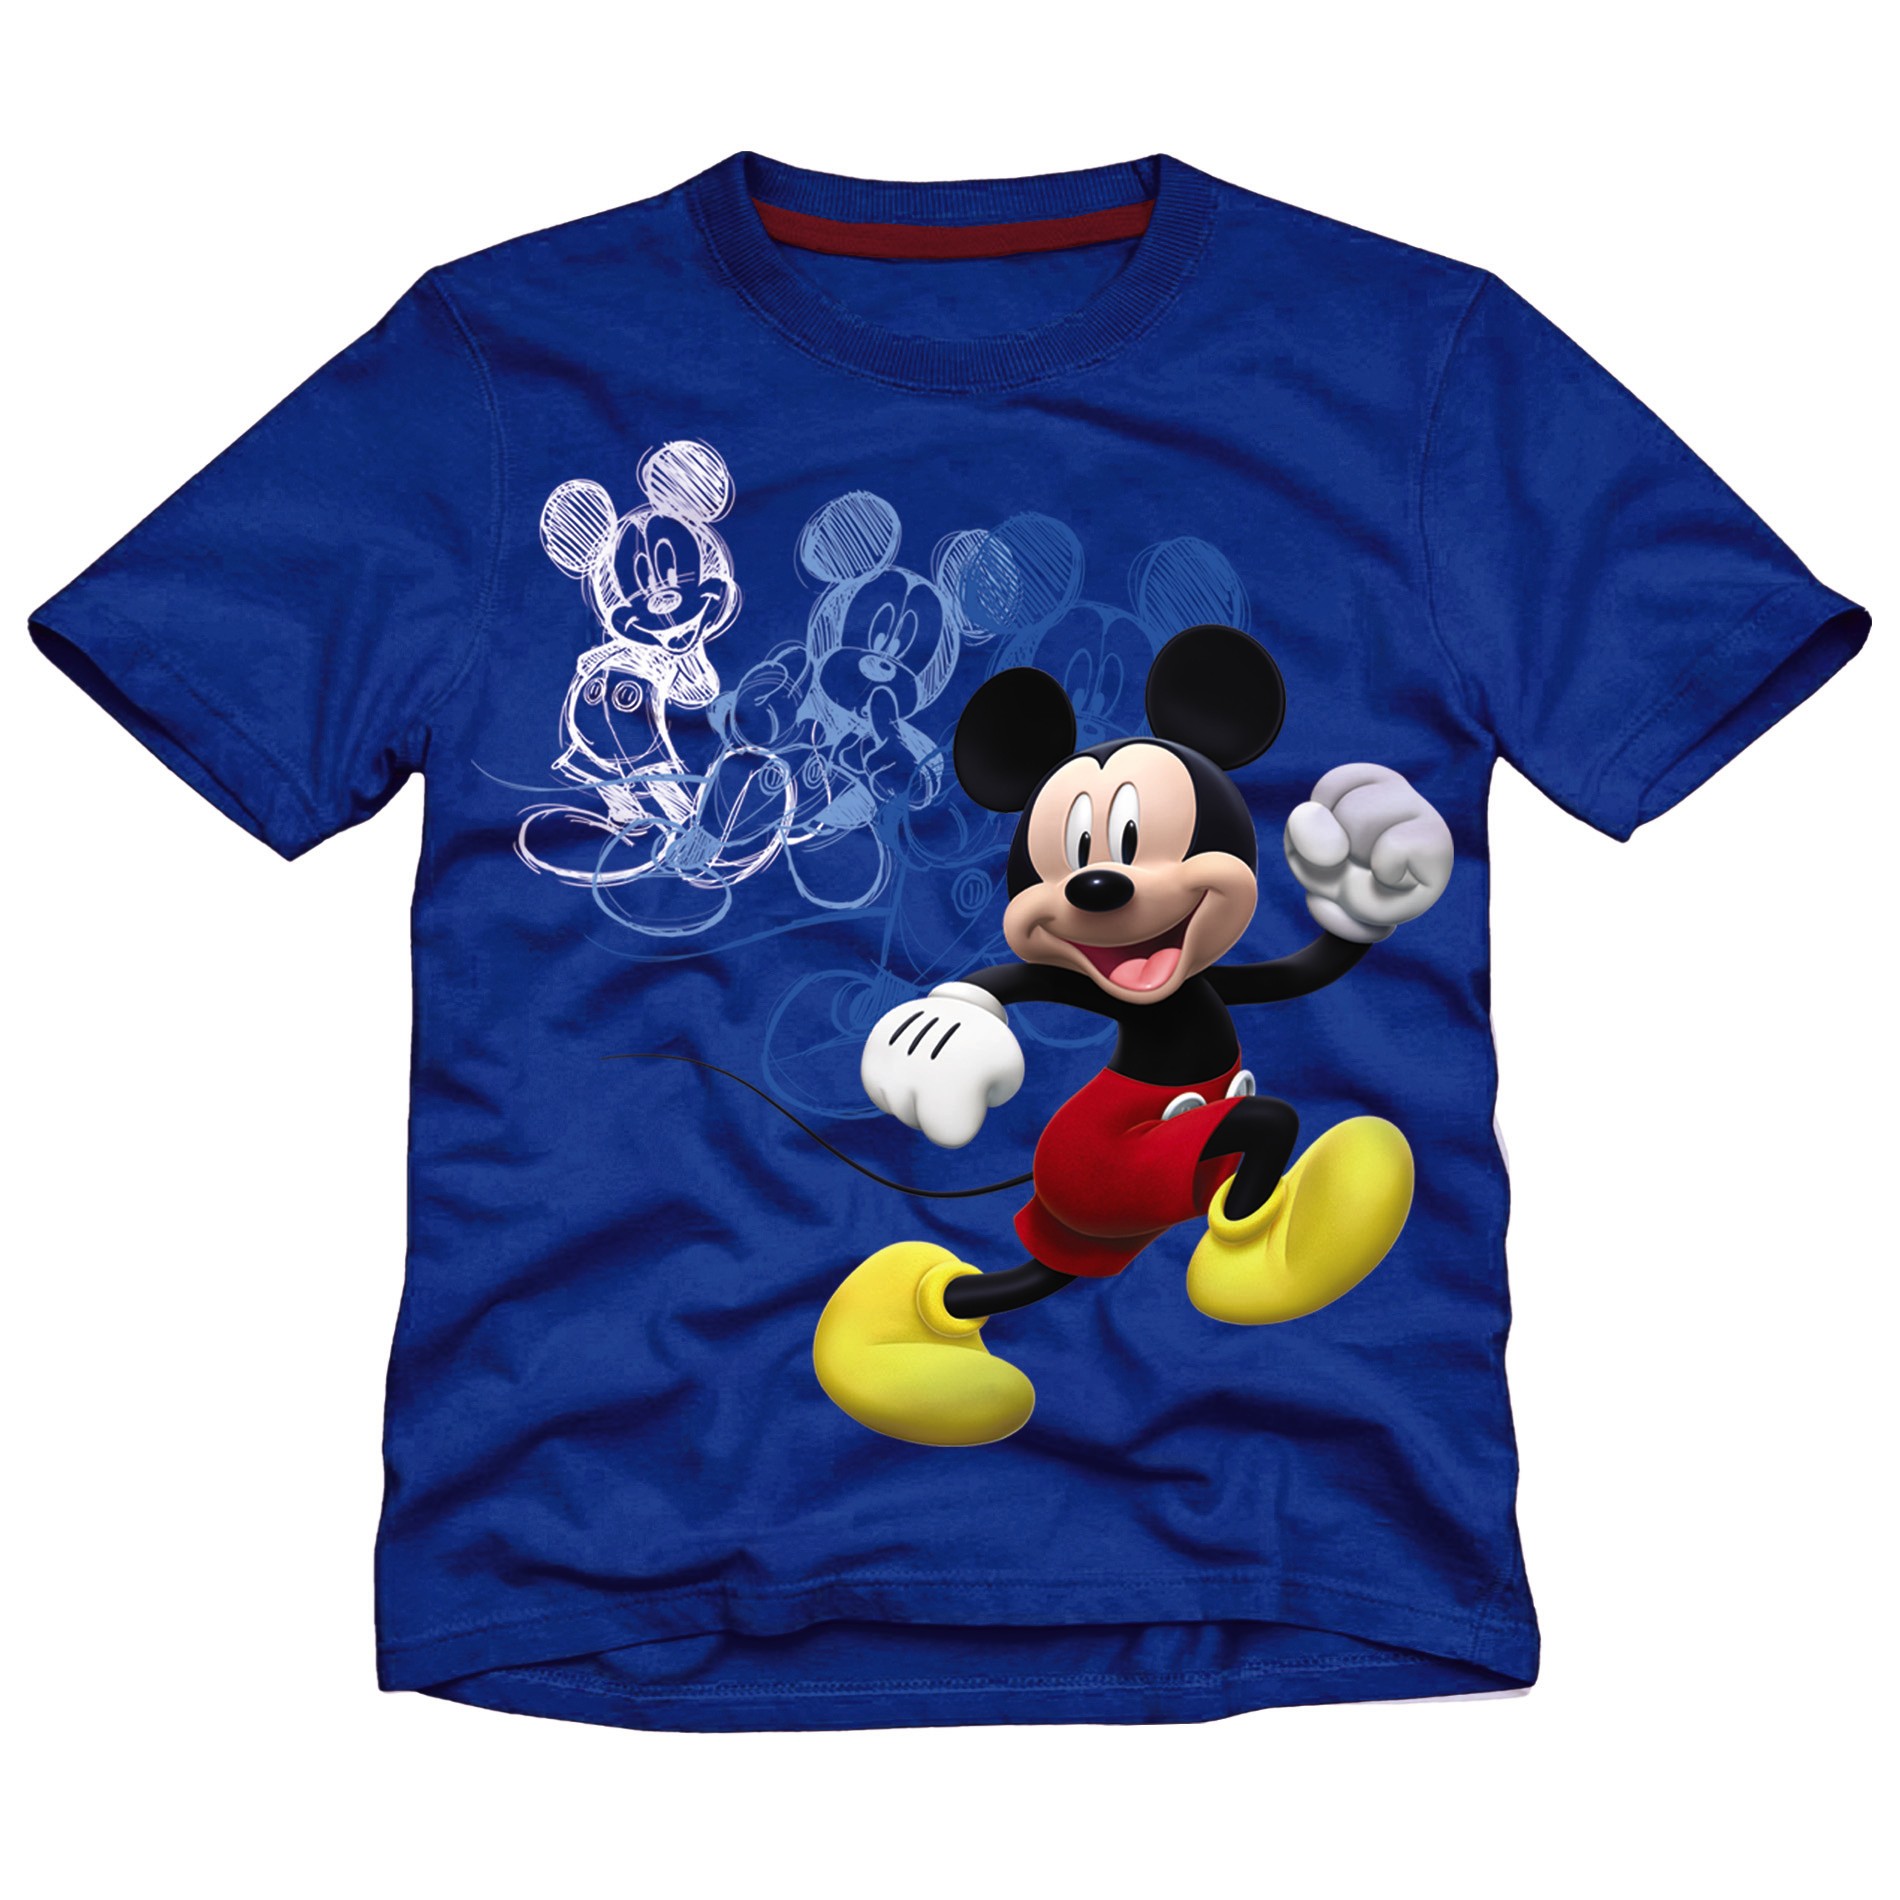 Disney Mickey Mouse Toddler Boy's Graphic T-Shirt